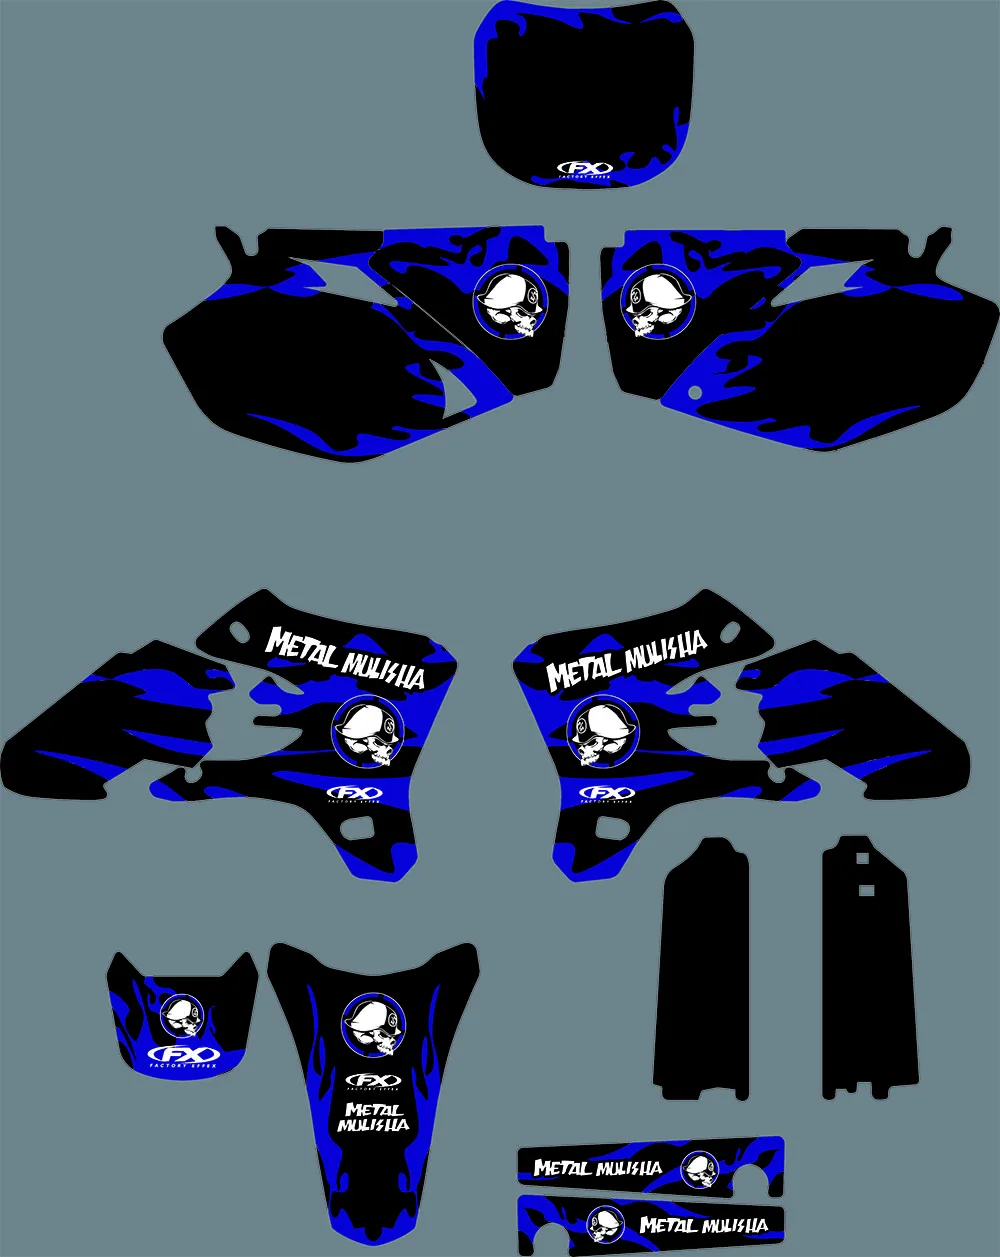 

GRAPHICS & BACKGROUNDS DECALS STICKERS Kits for Yamaha YZ250F YZ450F YZF250 YZF450 2003 2004 2005 YZ 250F 450F YZF 250 450